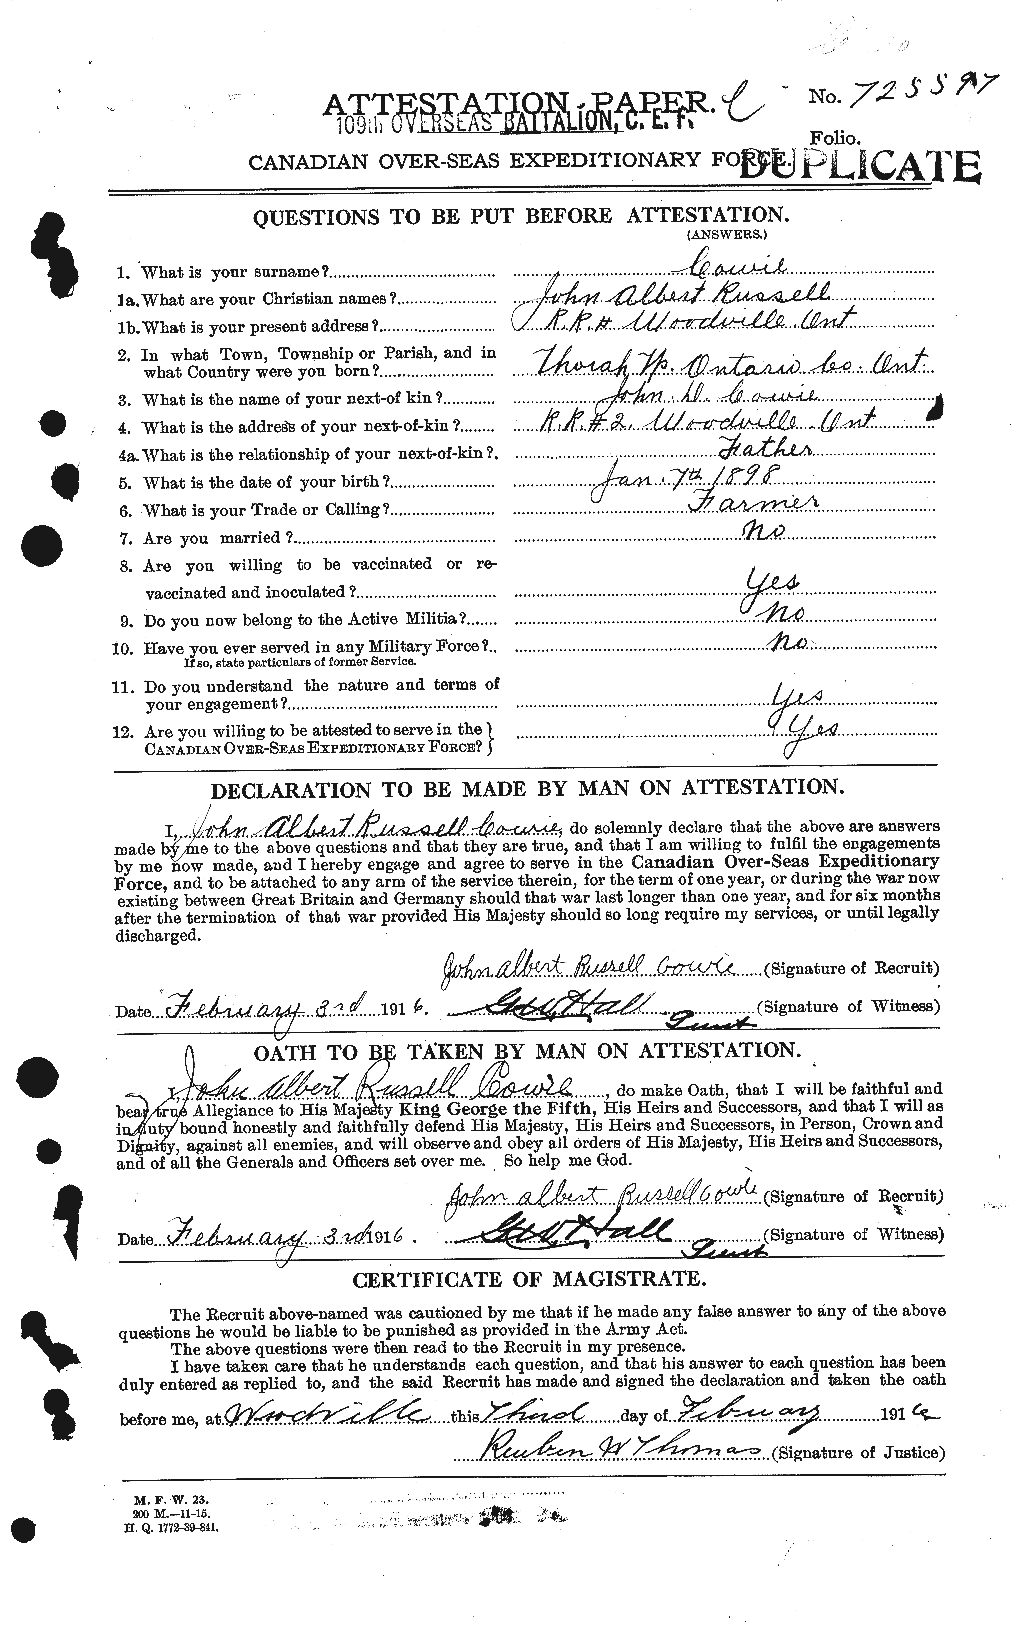 Personnel Records of the First World War - CEF 060006a